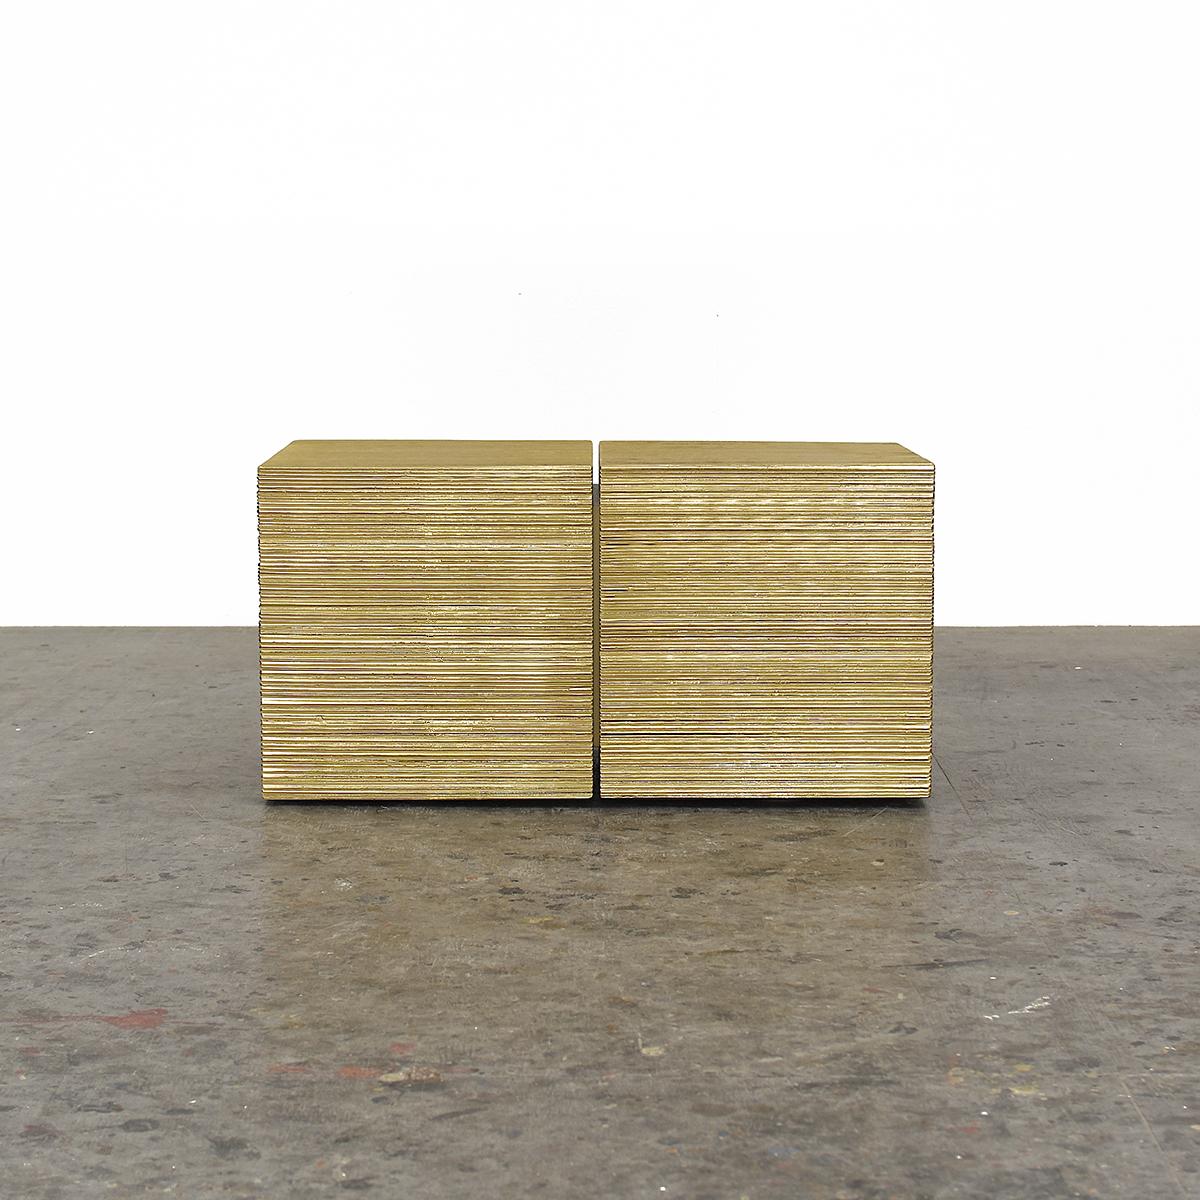 Oro, a new series by John Eric Byers, marks the artist’s 30th solo exhibition. An elegant balance of contrasts takes form in these visually stunning works. Blocks of wood are meticulously hand carved into a pattern that celebrates the beauty of